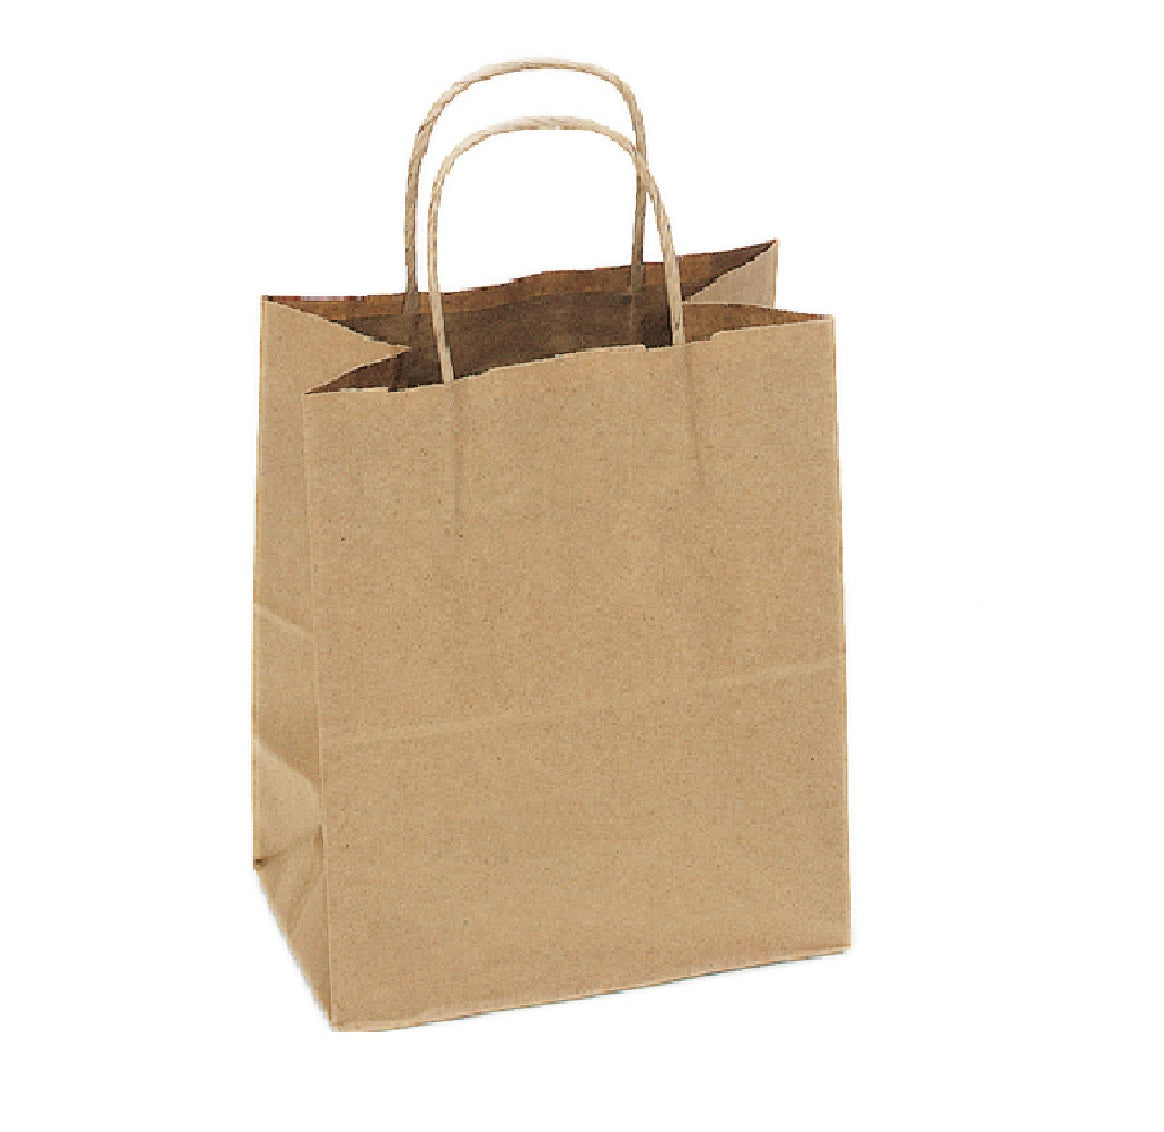 ProAmpac NKM-0810 Shopping Bag With Handles, Paper